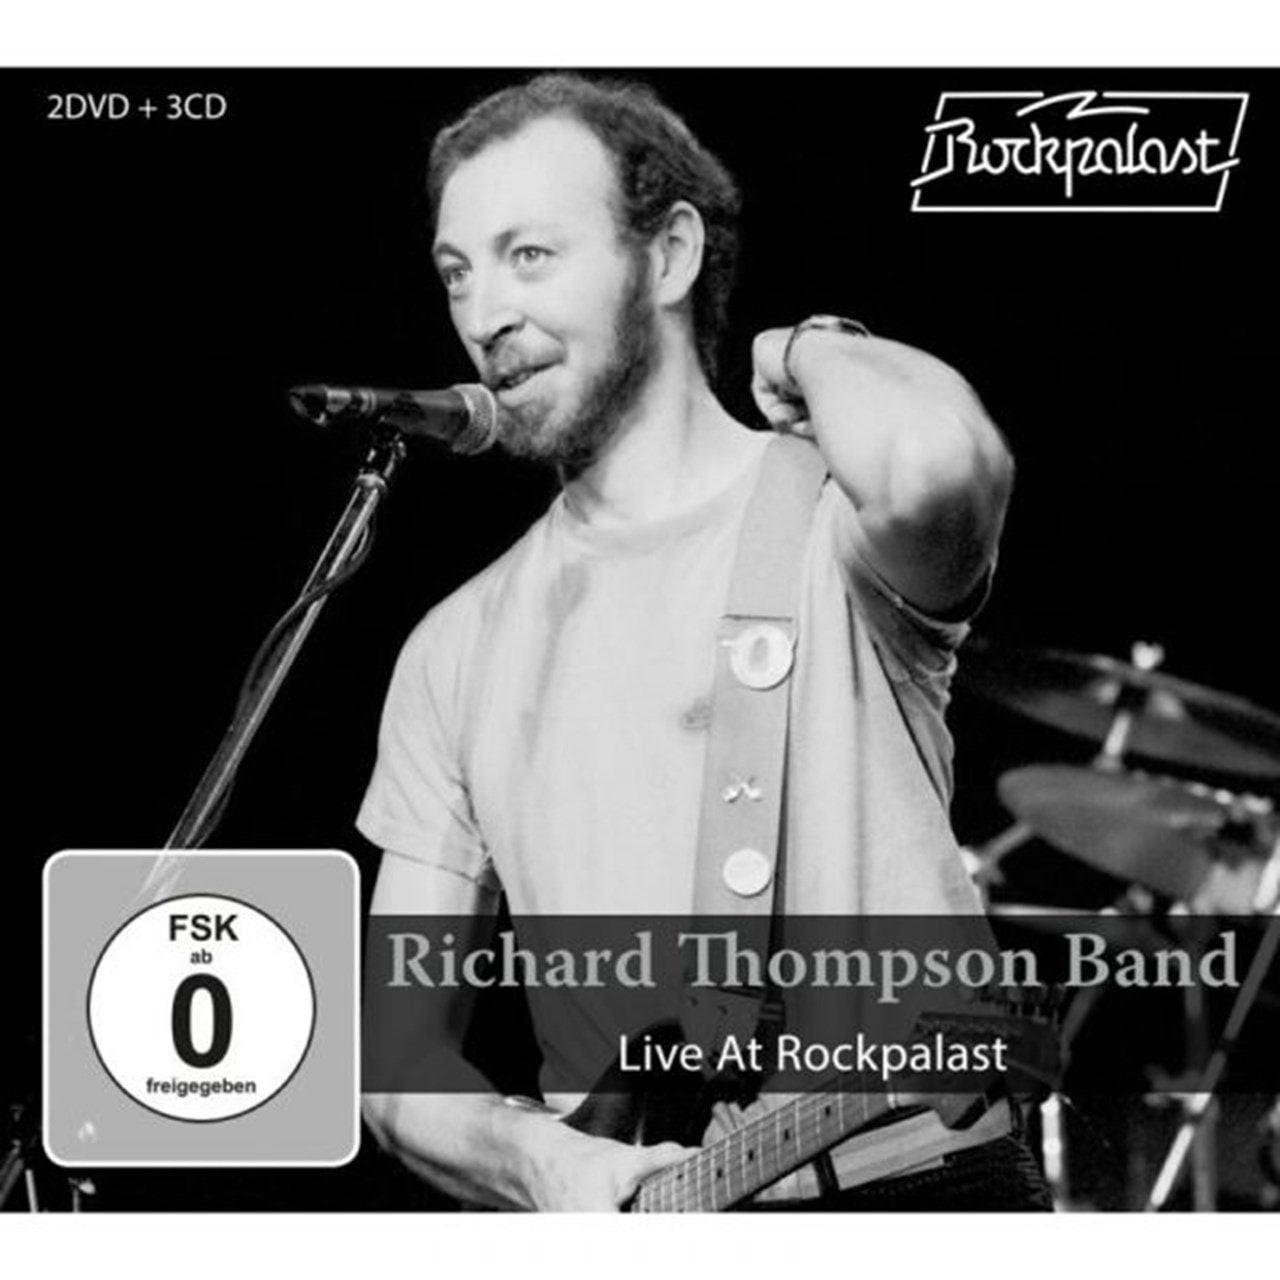 Richard Thompson Band Live at Rockpalast DVD Free shipping over £